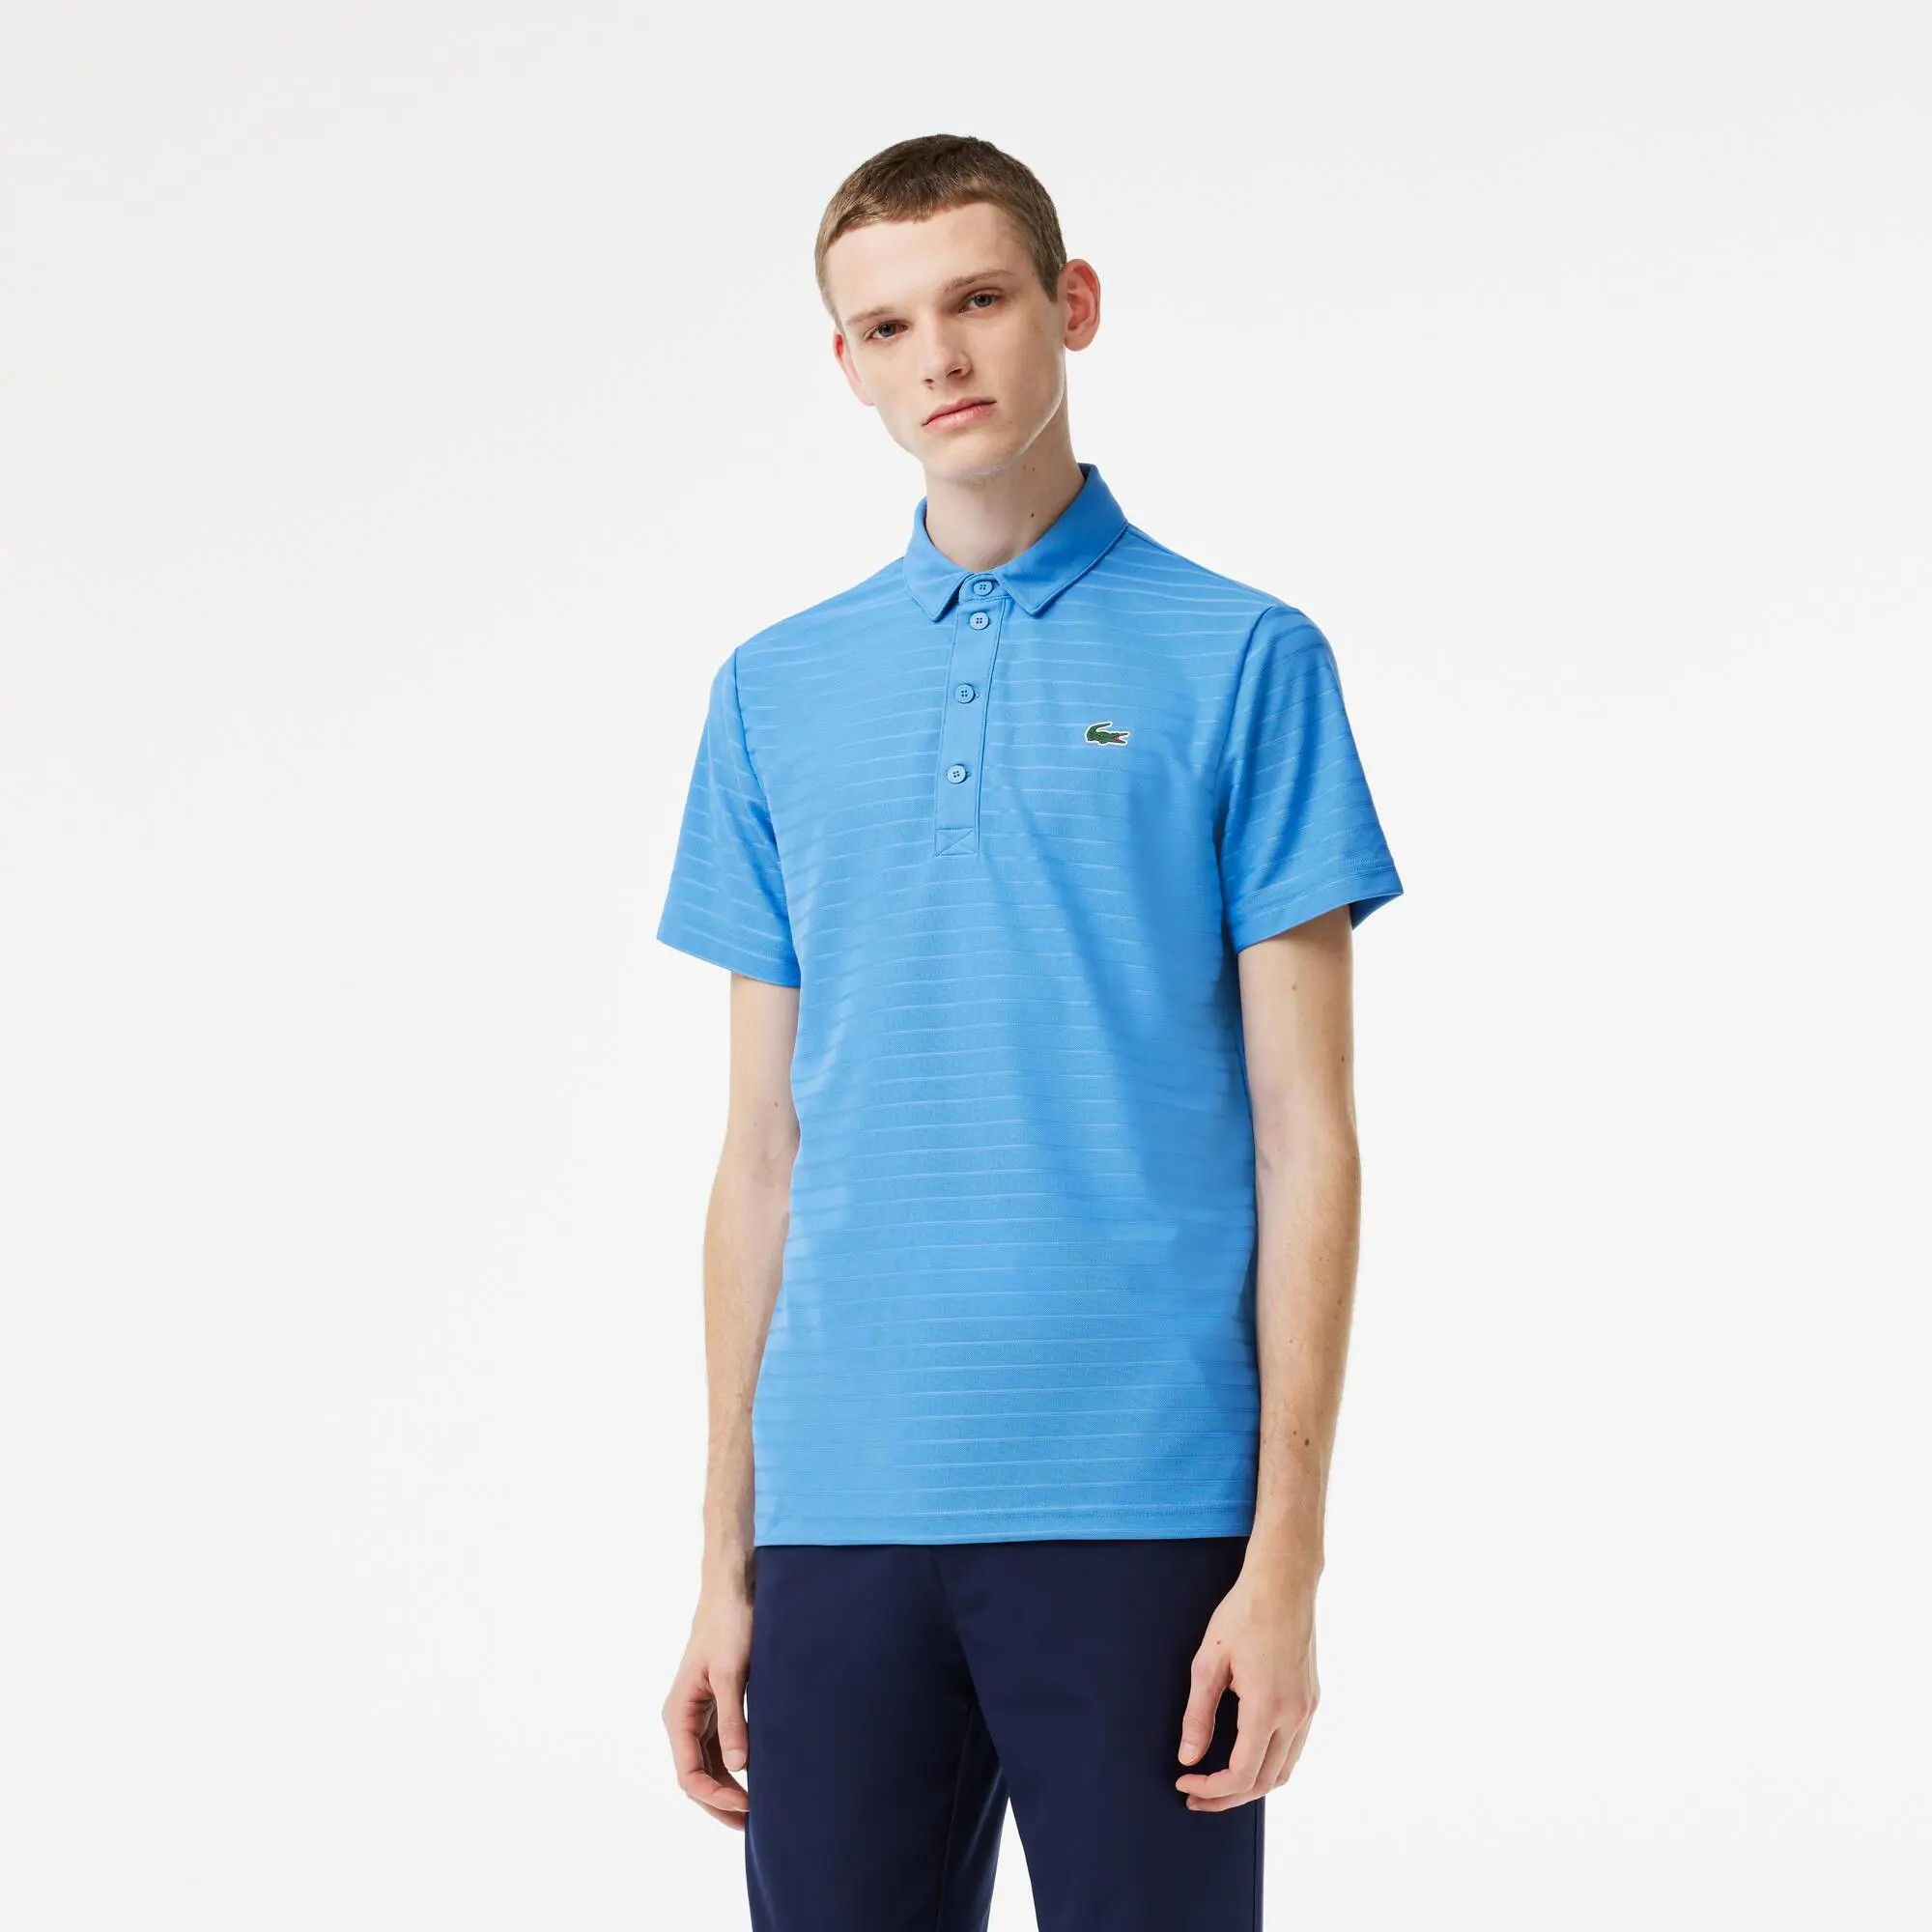 Lacoste Men's Lacoste SPORT Textured Breathable Golf Polo Shirt. 1